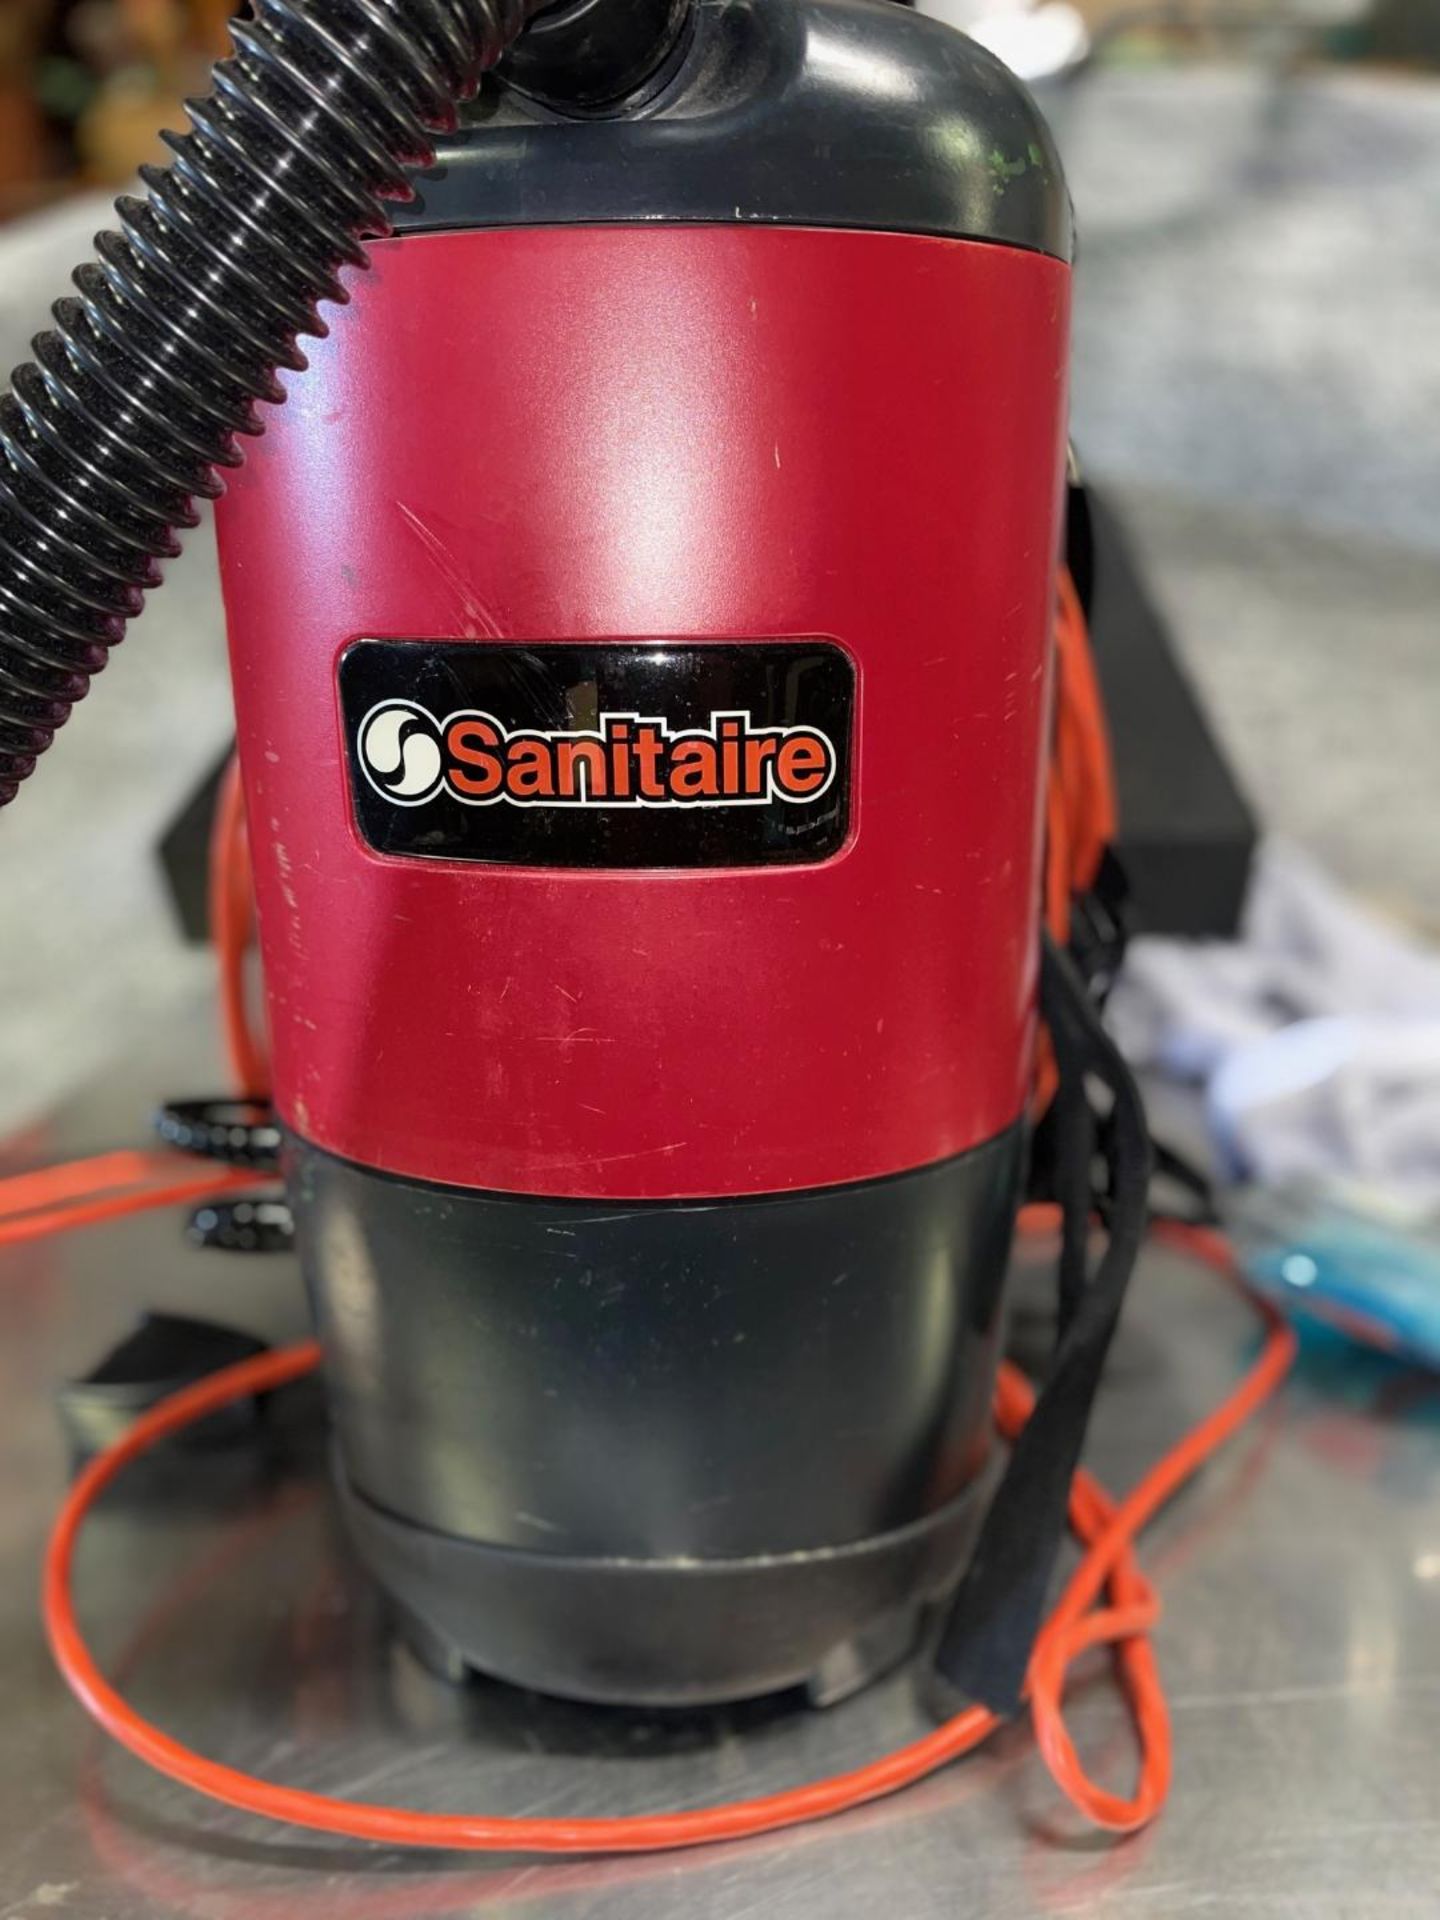 SANITAIRE SC412 BACKPACK VACUUM CLEANER WITH 50-FOOT POWER CORD(SUBJECT TO BULK BID LOT 99) - Image 3 of 3